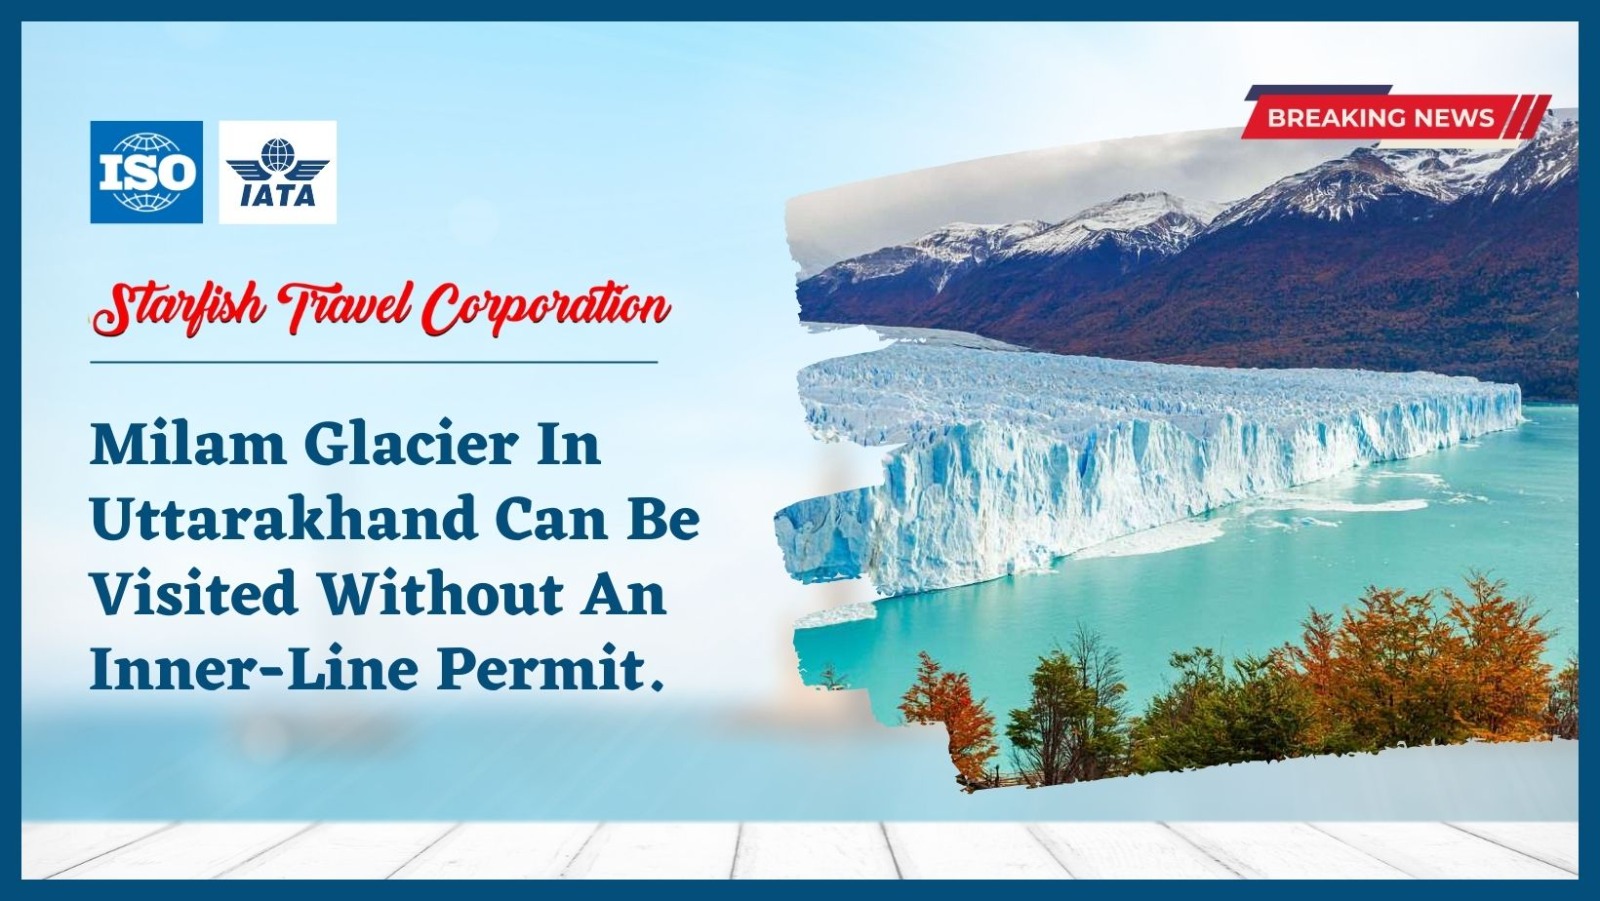 Milam Glacier In Uttarakhand Can Be Visited Without An Inner-Line Permit.